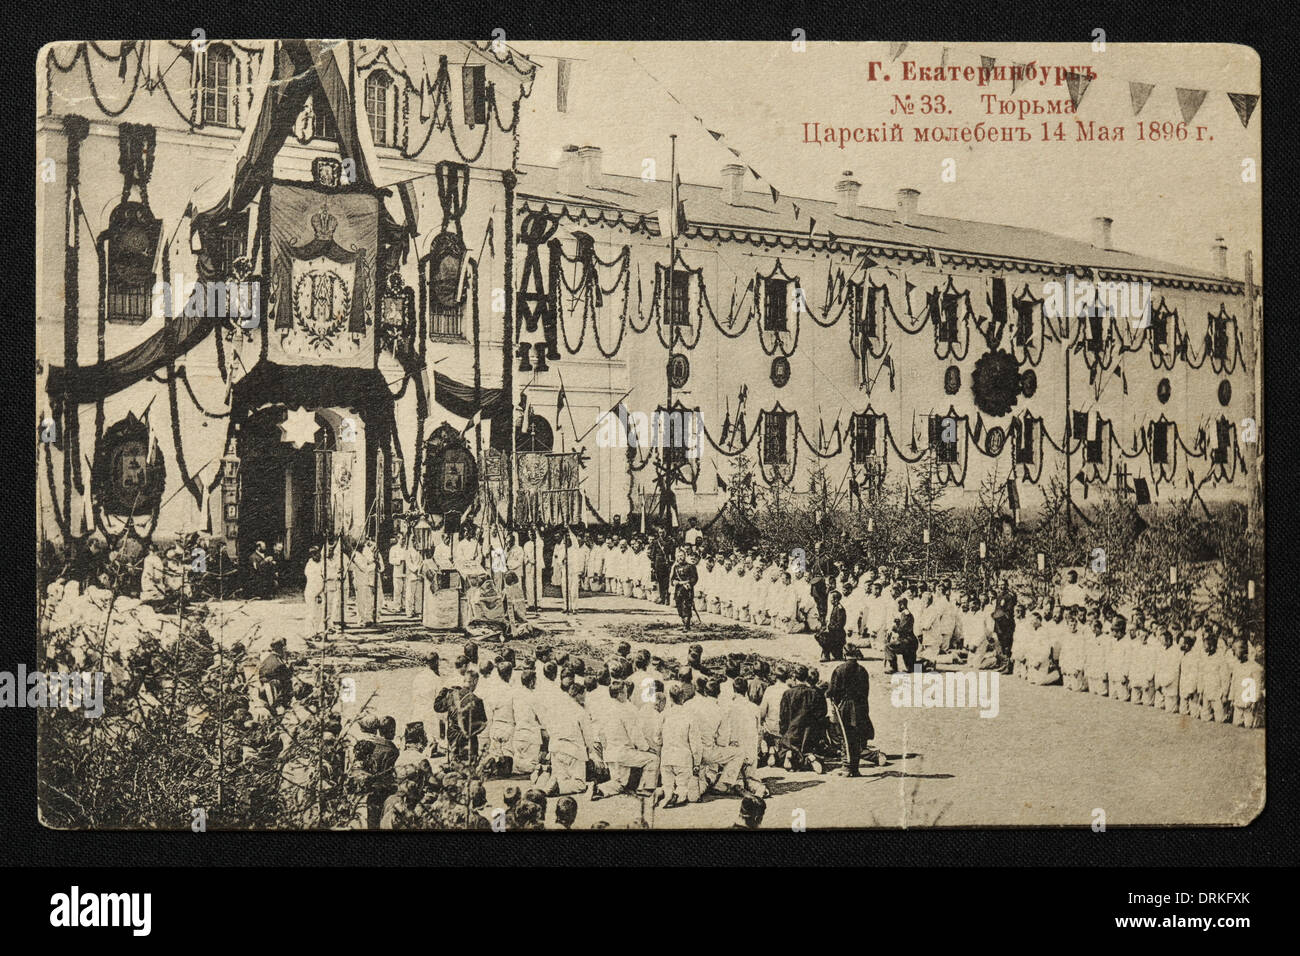 Prisoners attend the thanksgiving service in honour of the Coronation of Tsar Nicholas II of Russia on May 14, 1896 in the prison in Yekaterinburg, Russian Empire. Black and white vintage photograph by Russian photographer Veniamin Metenkov dated from the beginning of the 20th century issued in the Russian vintage postcard published by Veniamin Metenkov himself in Yekaterinburg. Text in Russian: Yekaterinburg. The Jail. Tsar Service on May 14, 1896. Courtesy of the Azoor Postcard Collection. Stock Photo